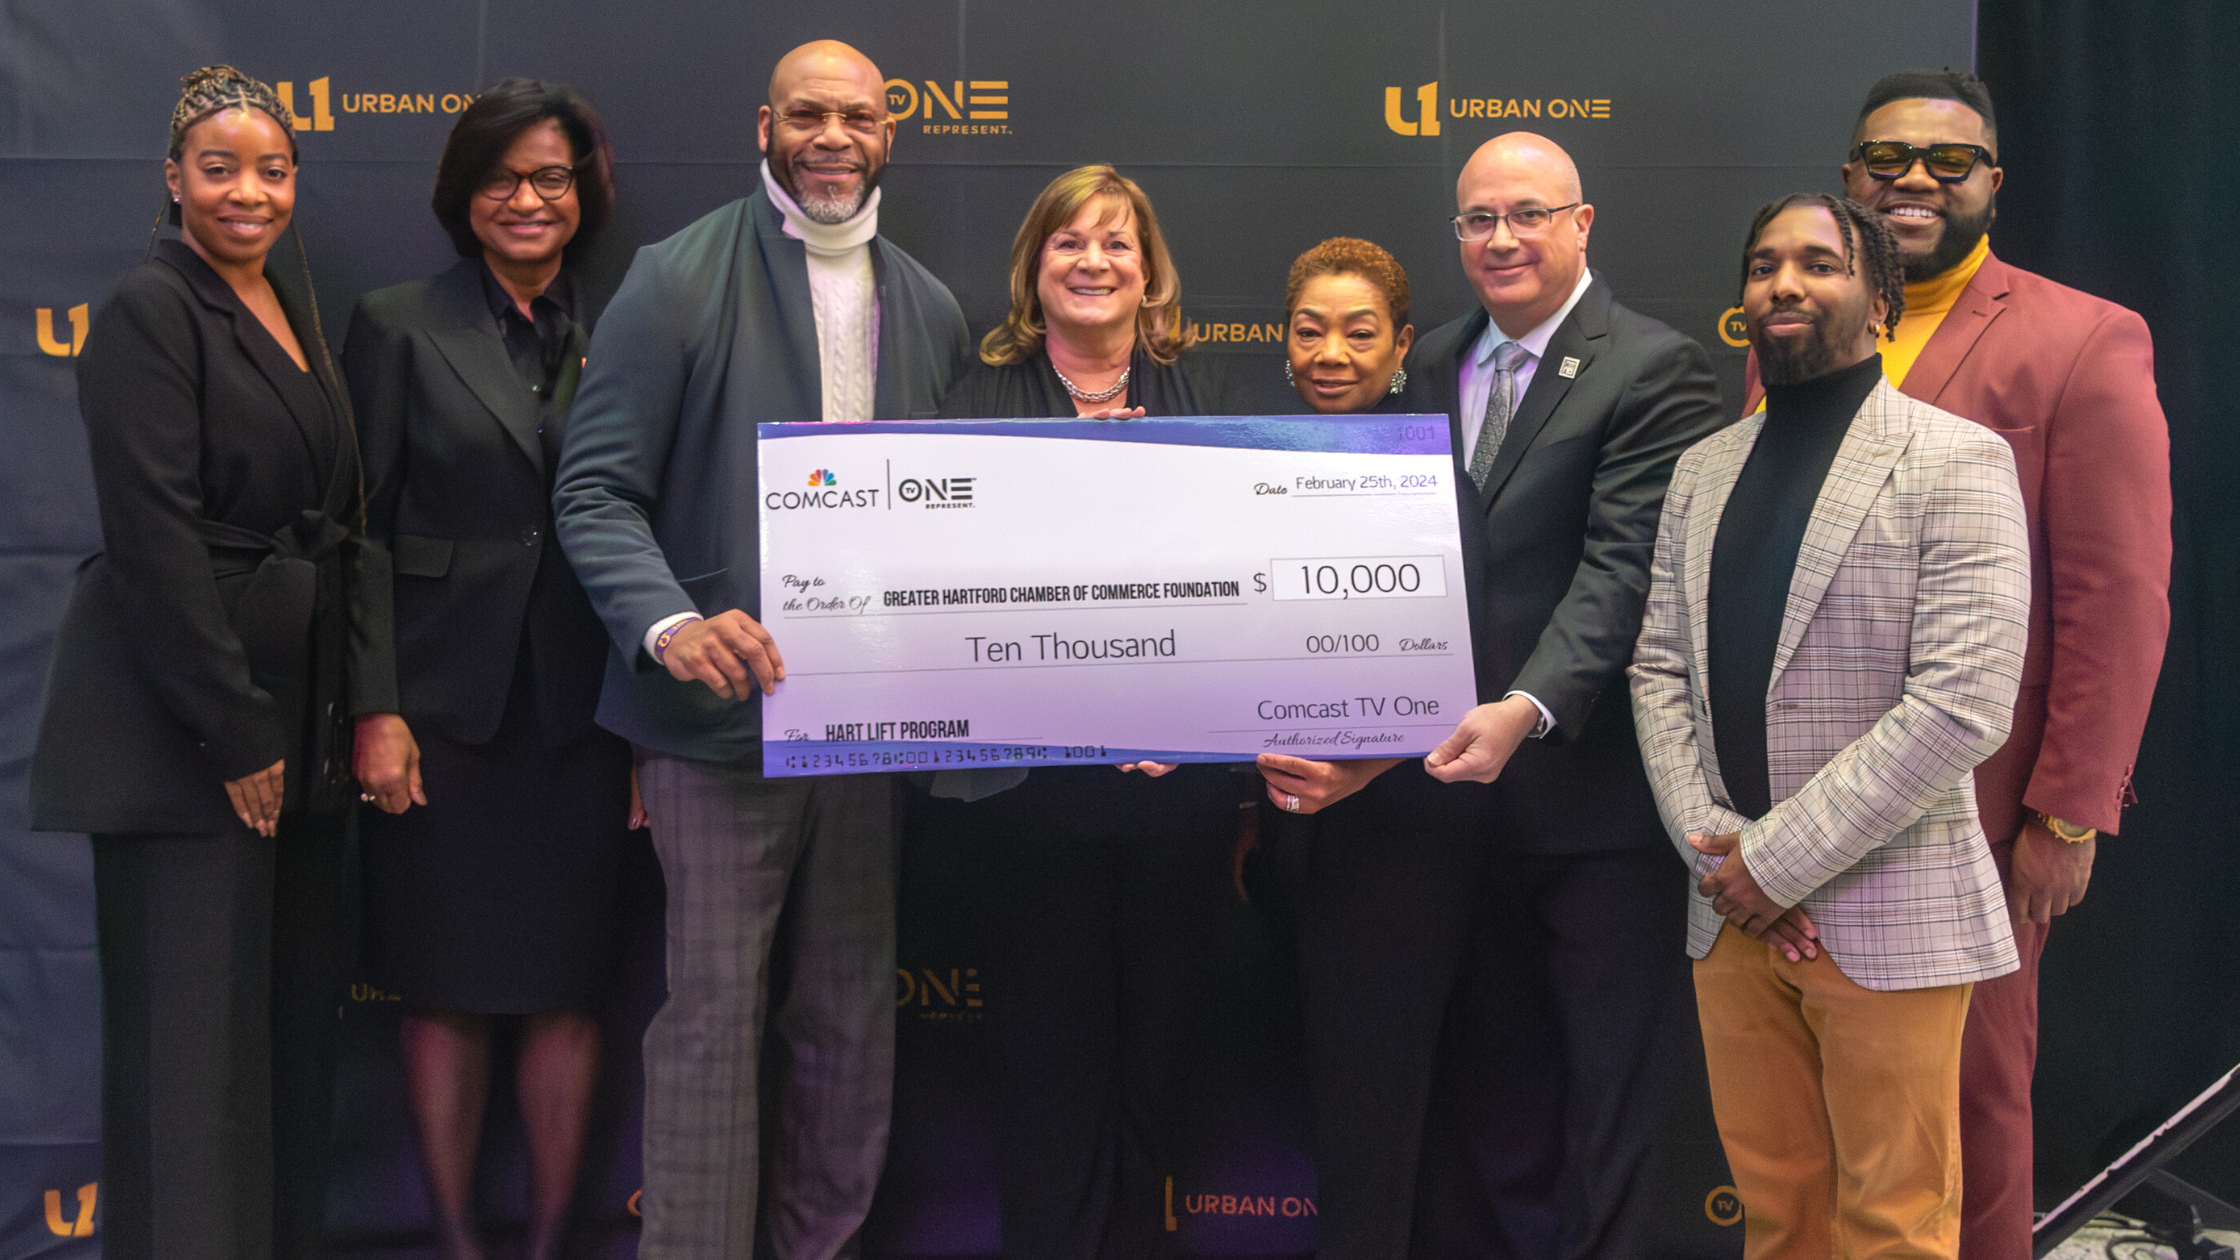 Comcast and TV One Award $10,000 Grant to Hart Lift Program at Black History Month Celebration